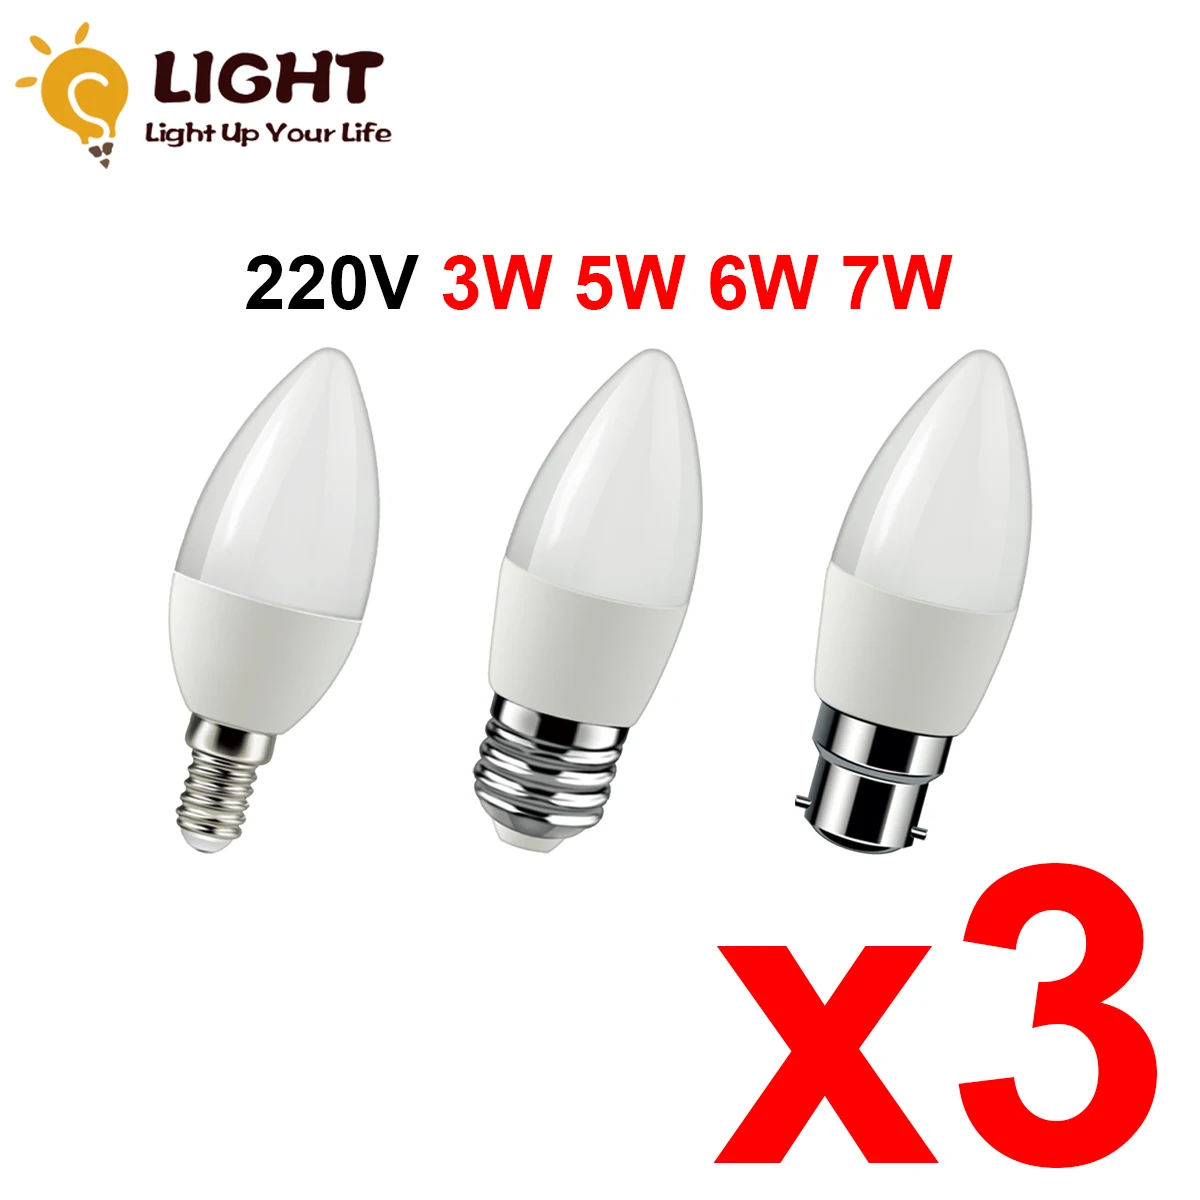 

3PCS Led Candle Bulb C37 3W 5W 6W 7W B22 E27 E14 AC220v-240v 3000K 4000K 6000k For Home Decoration Lamp